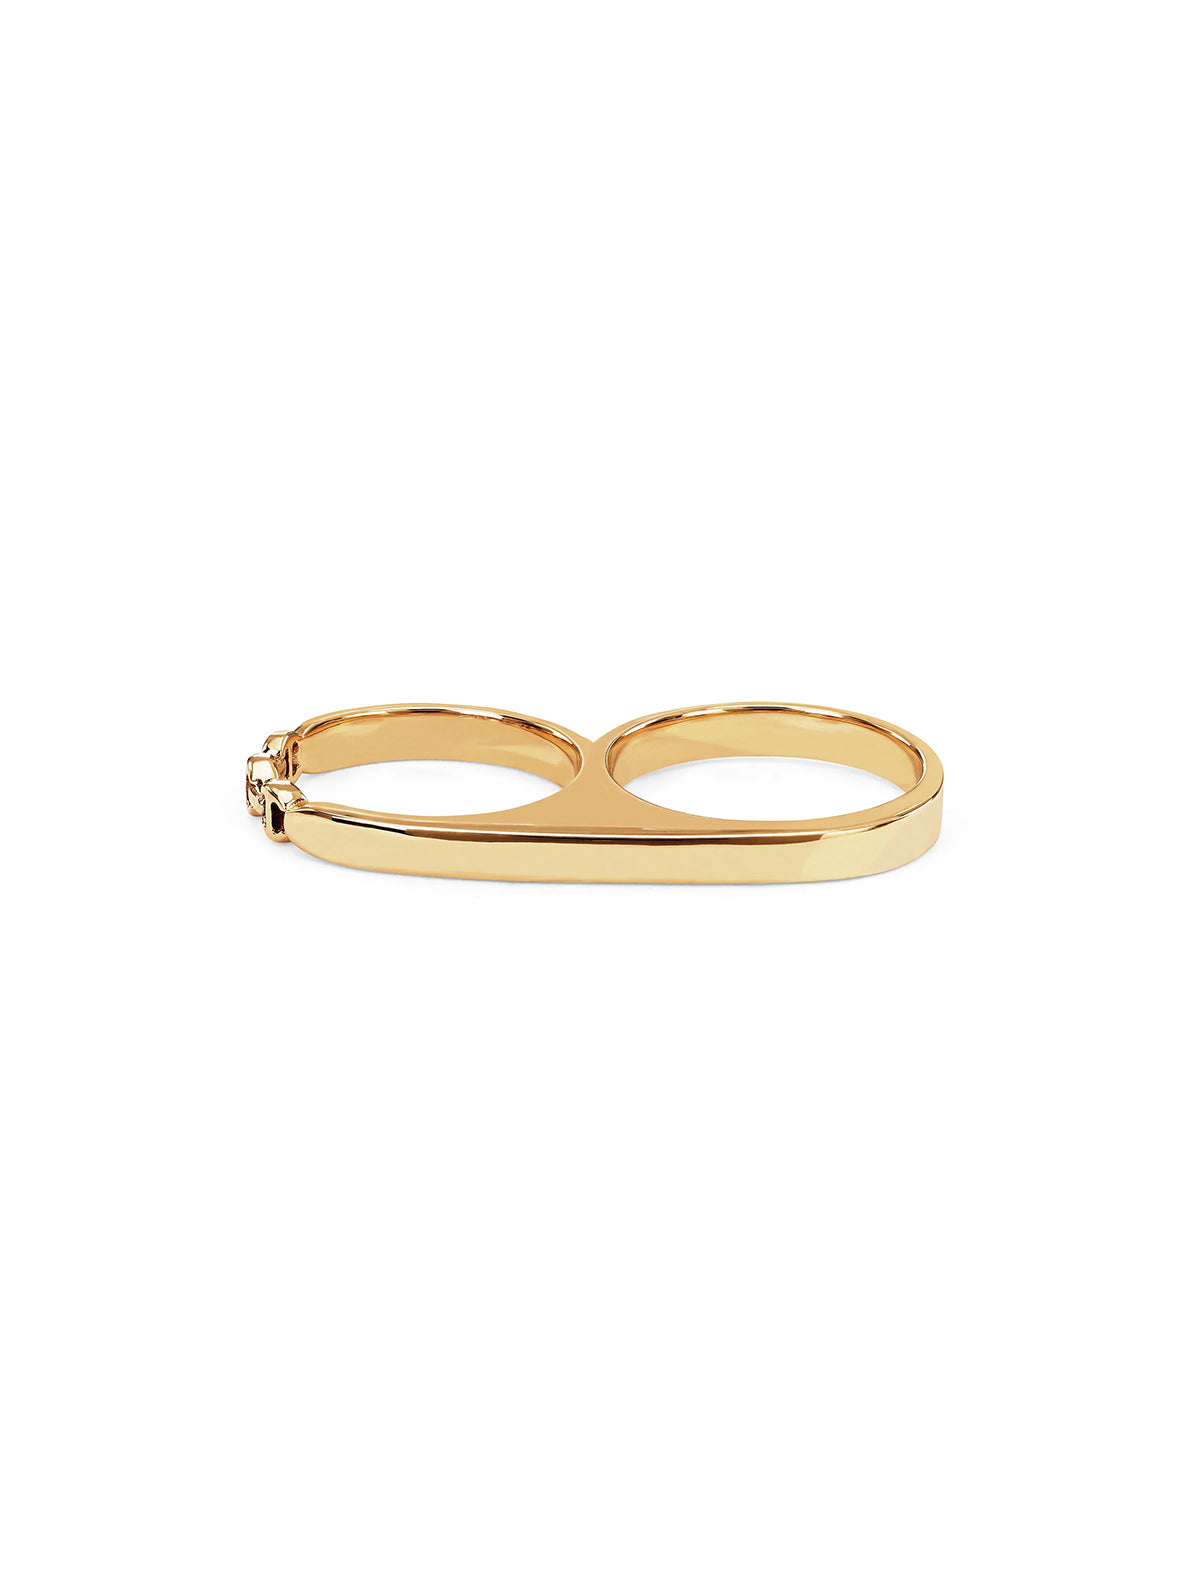 HOORSENBUHS Double Knuckle Ring 18k Yellow Gold